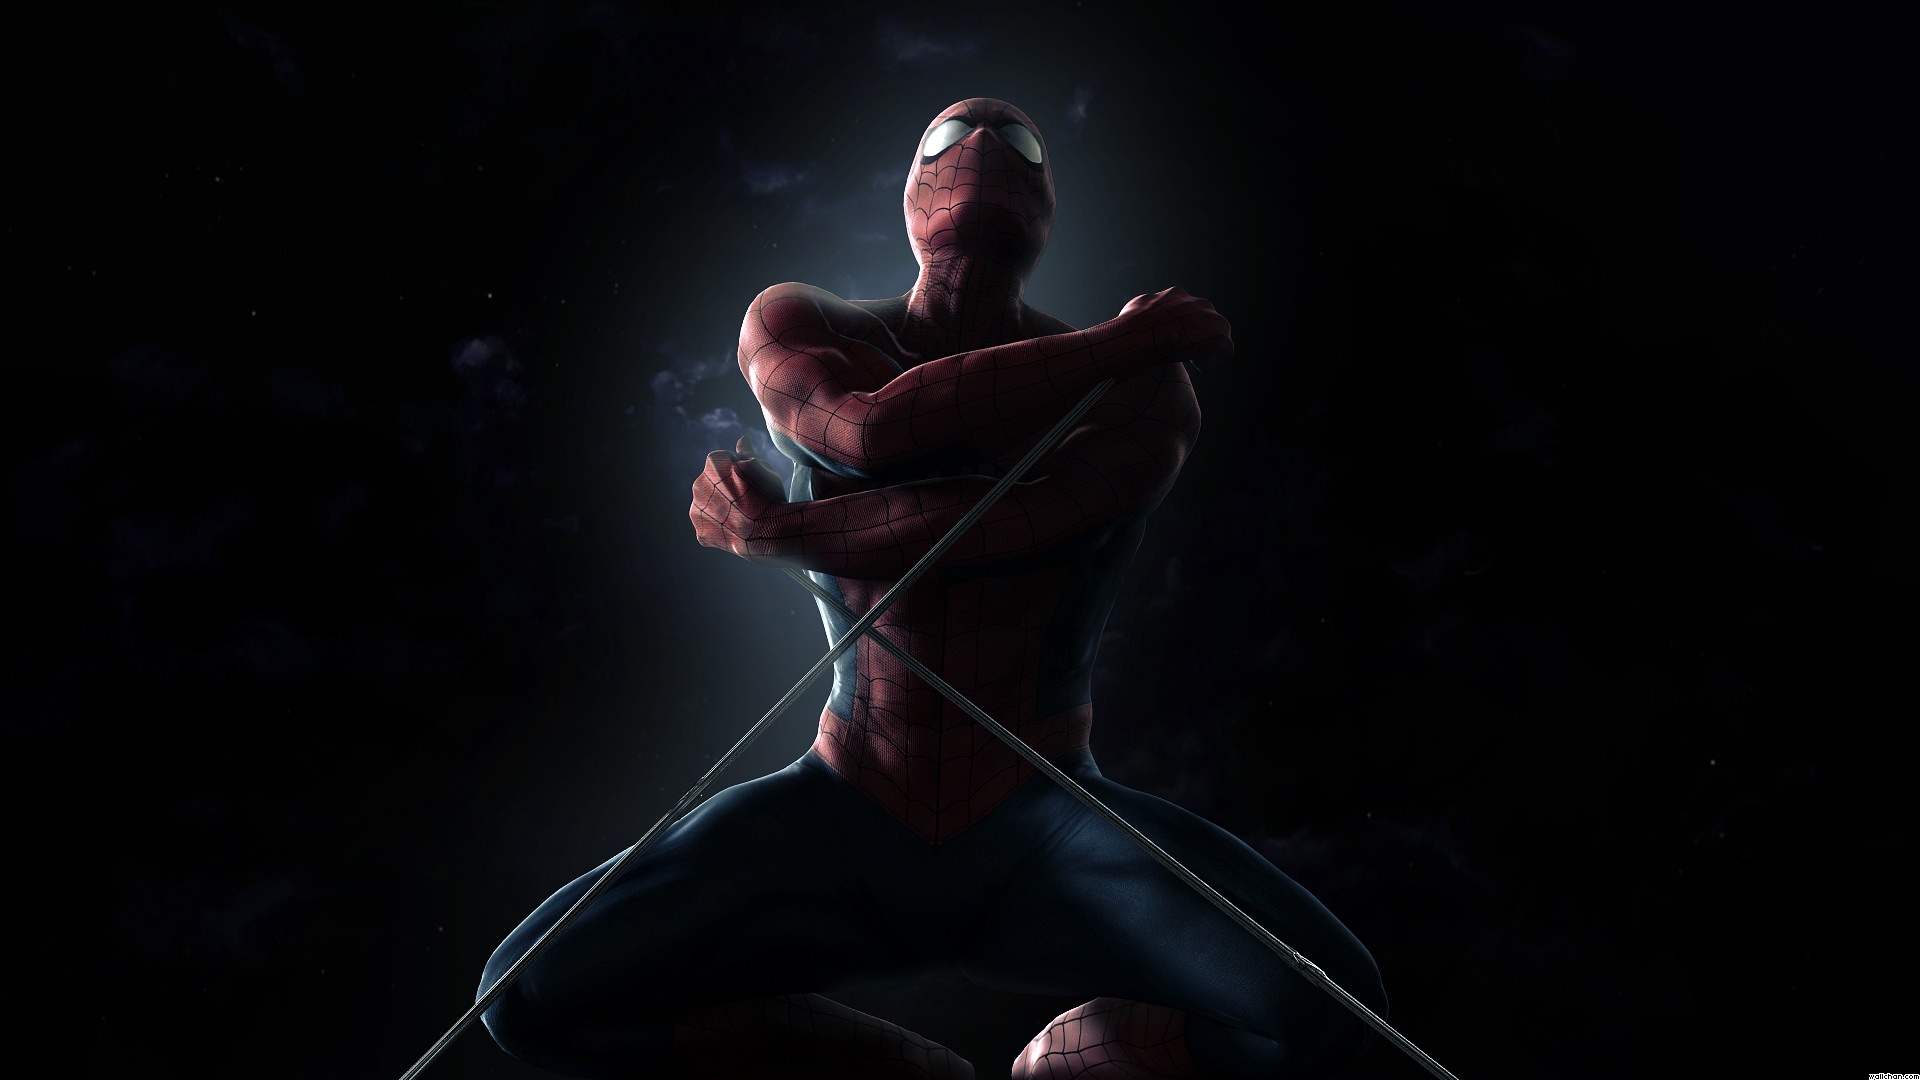 30+ Spiderman Wallpapers, Backgrounds, Images | FreeCreatives